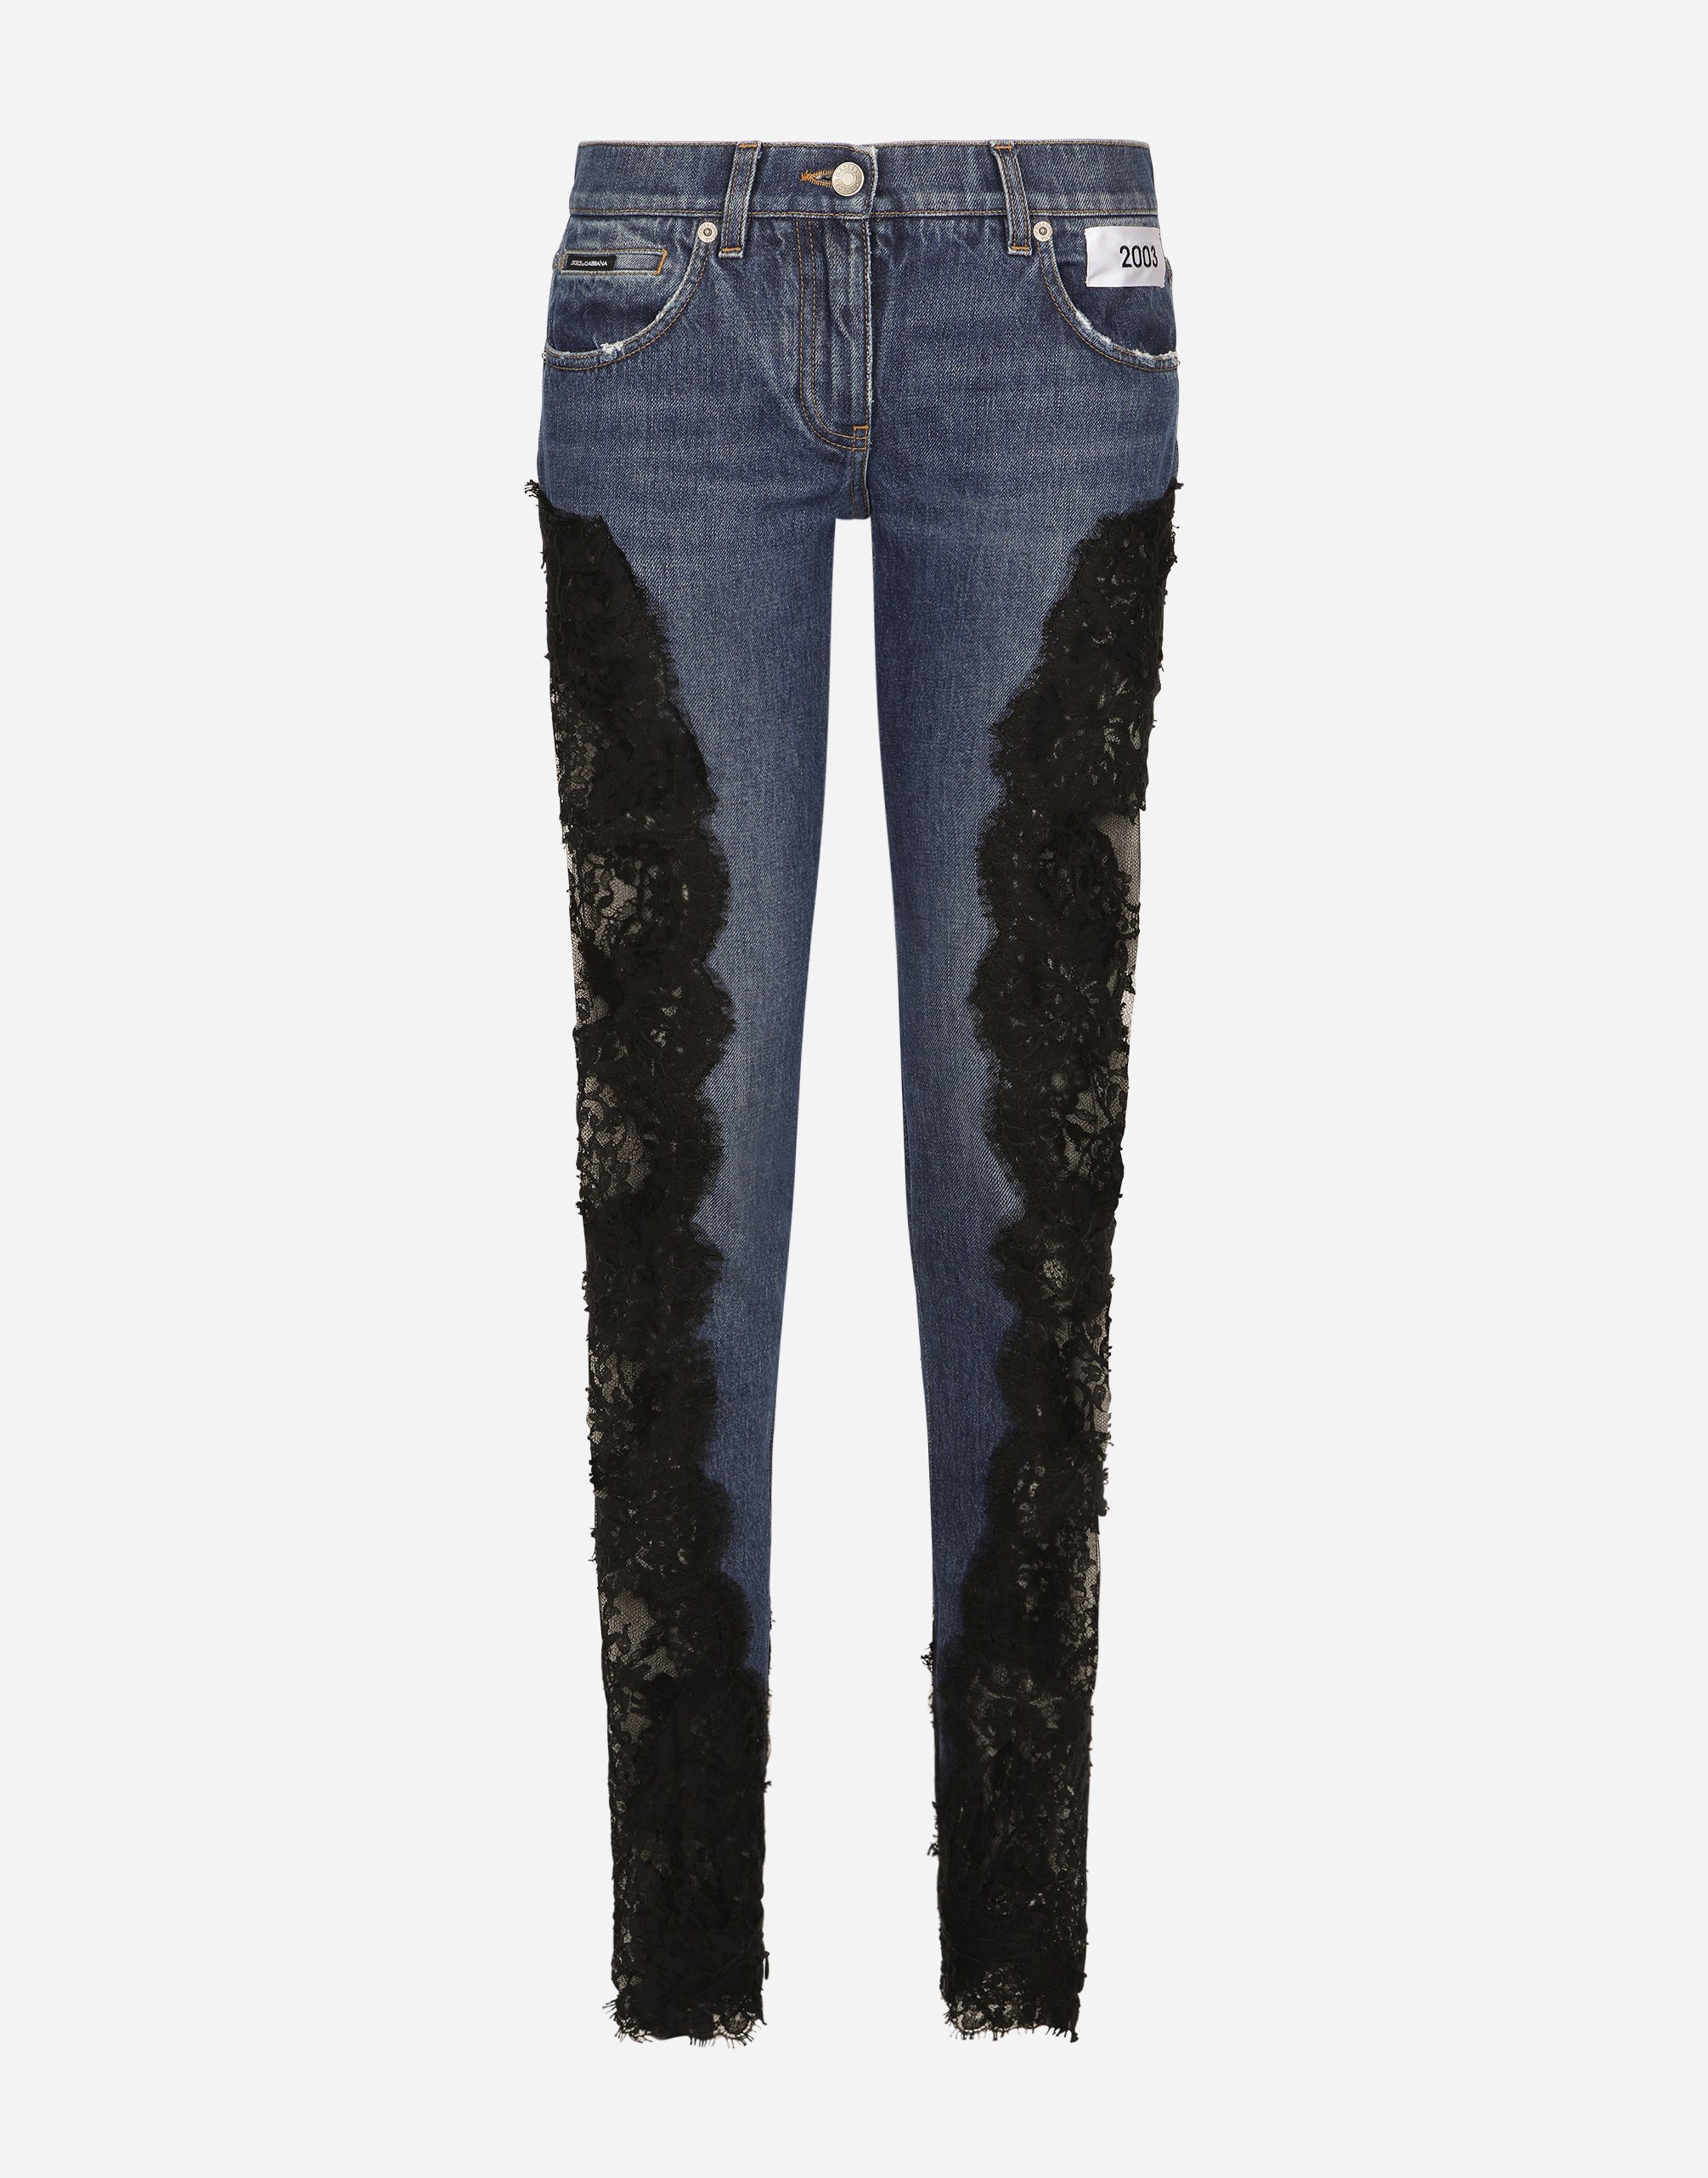 KIM DOLCE&GABBANA Denim jeans with lace inlay in Multicolor